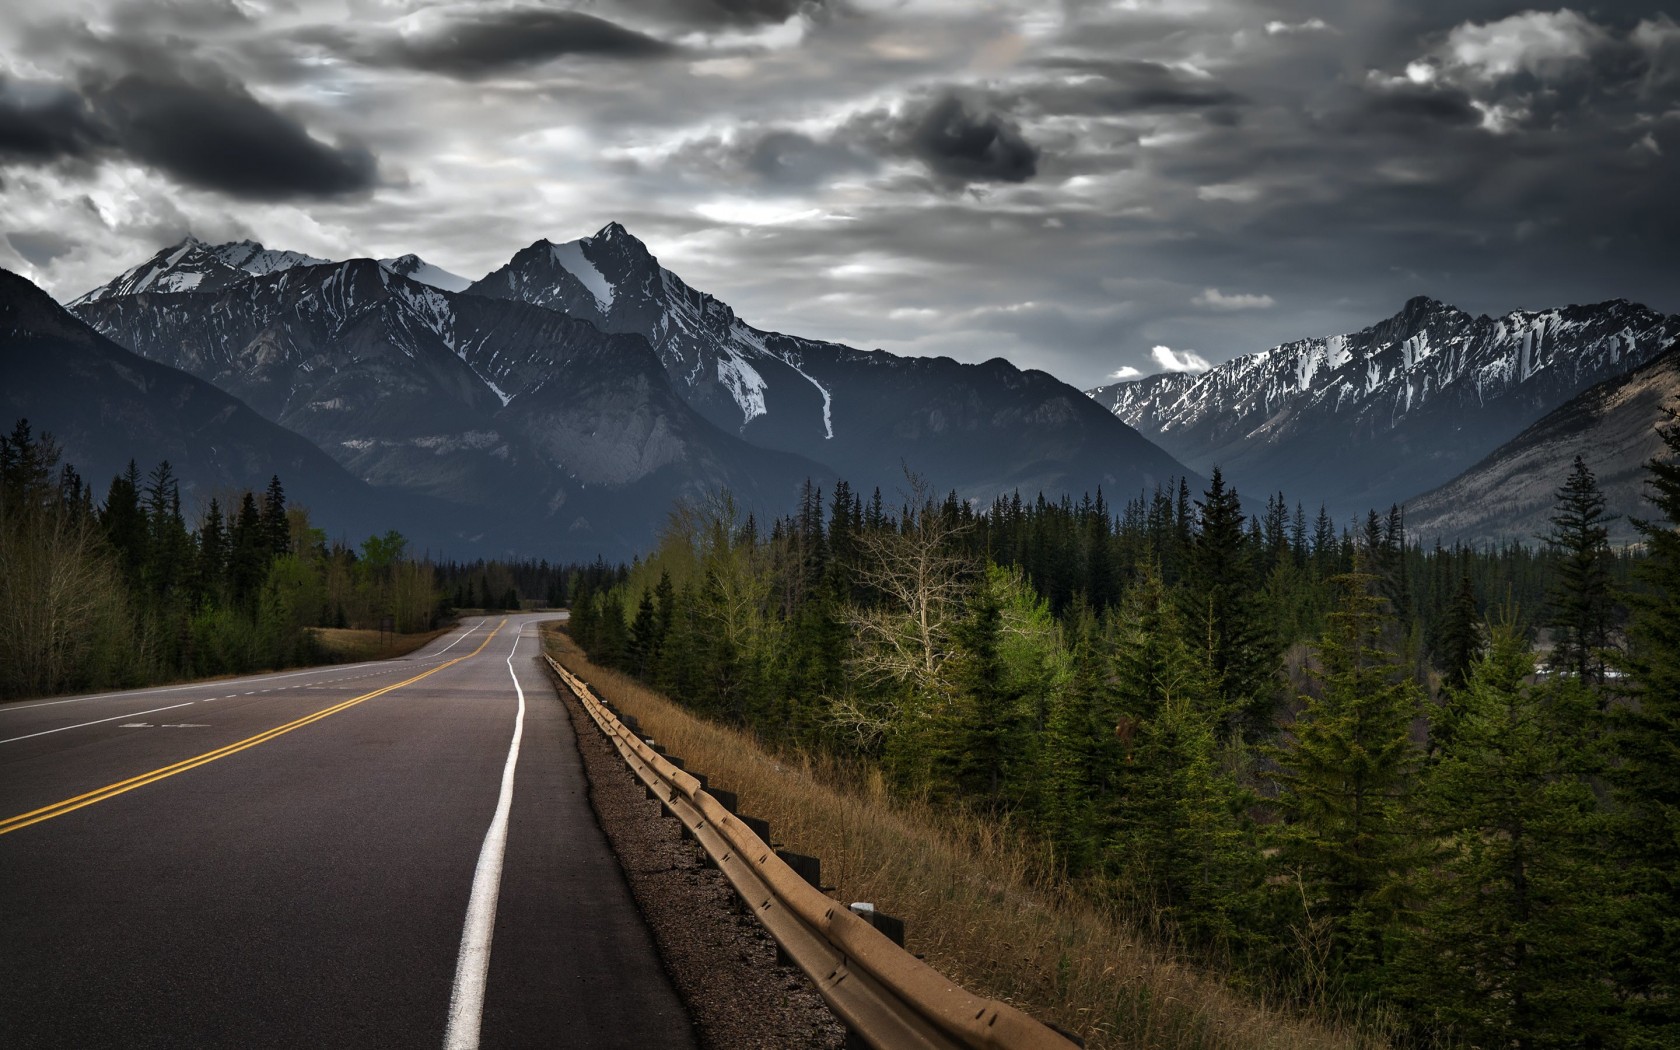 Road trip on a stormy day, Canada Wallpaper for Desktop 1680x1050